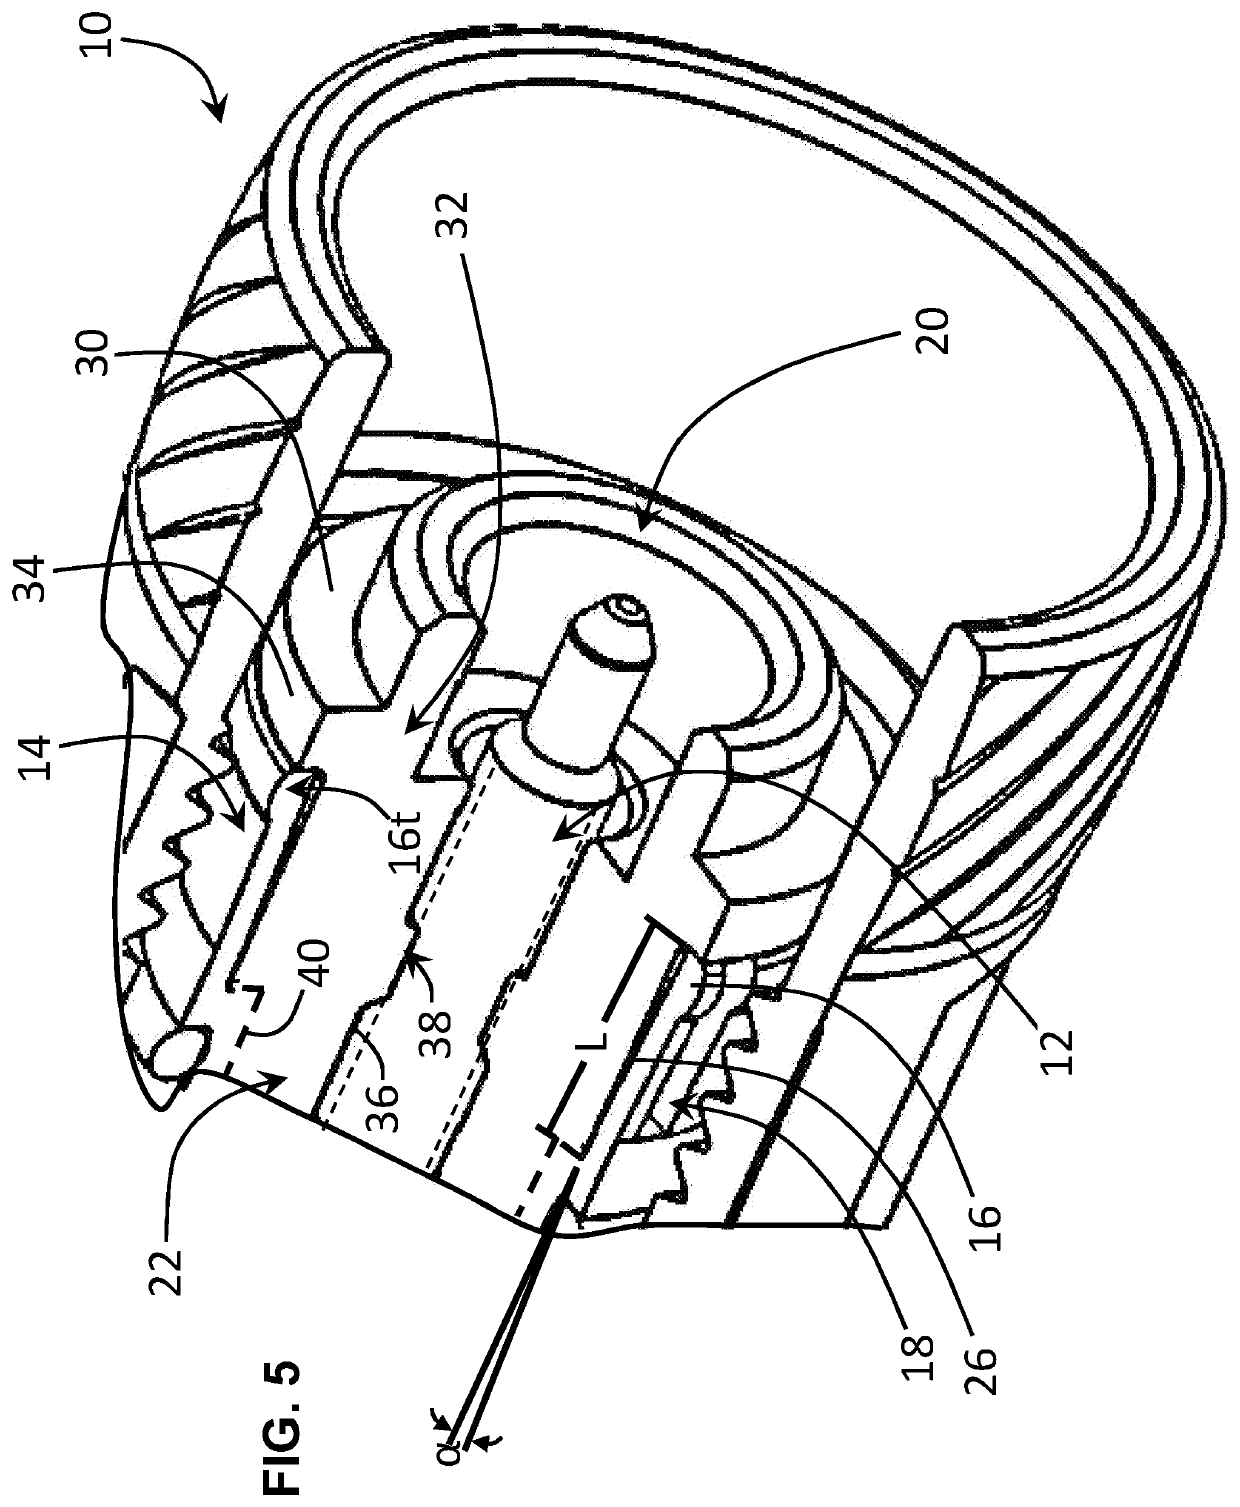 Annular abutment/alignment guide for cable connectors